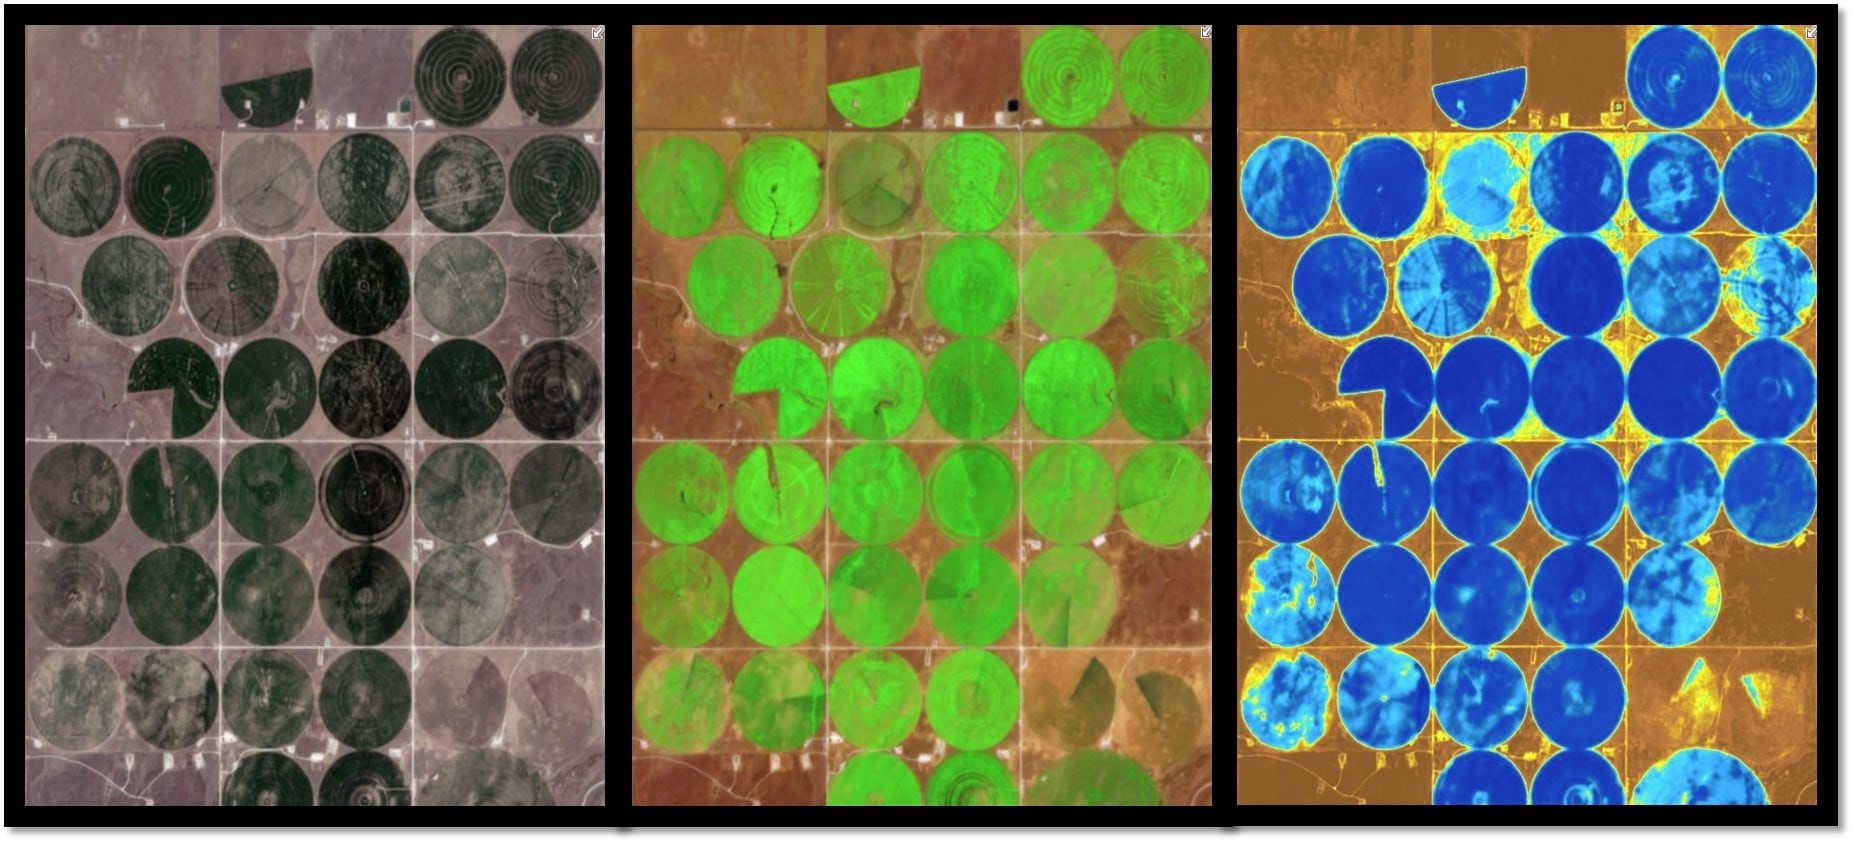  agricultural fields in various sentinel-2 band combinations. Left: Natural colour (displays the optical wavelengths our eyes naturall detect). middle: short wave infrared vegetation (showing the most vigorous vegtation in bright green). right: Water Mositure index (showing the highest moisture levels in blue). 